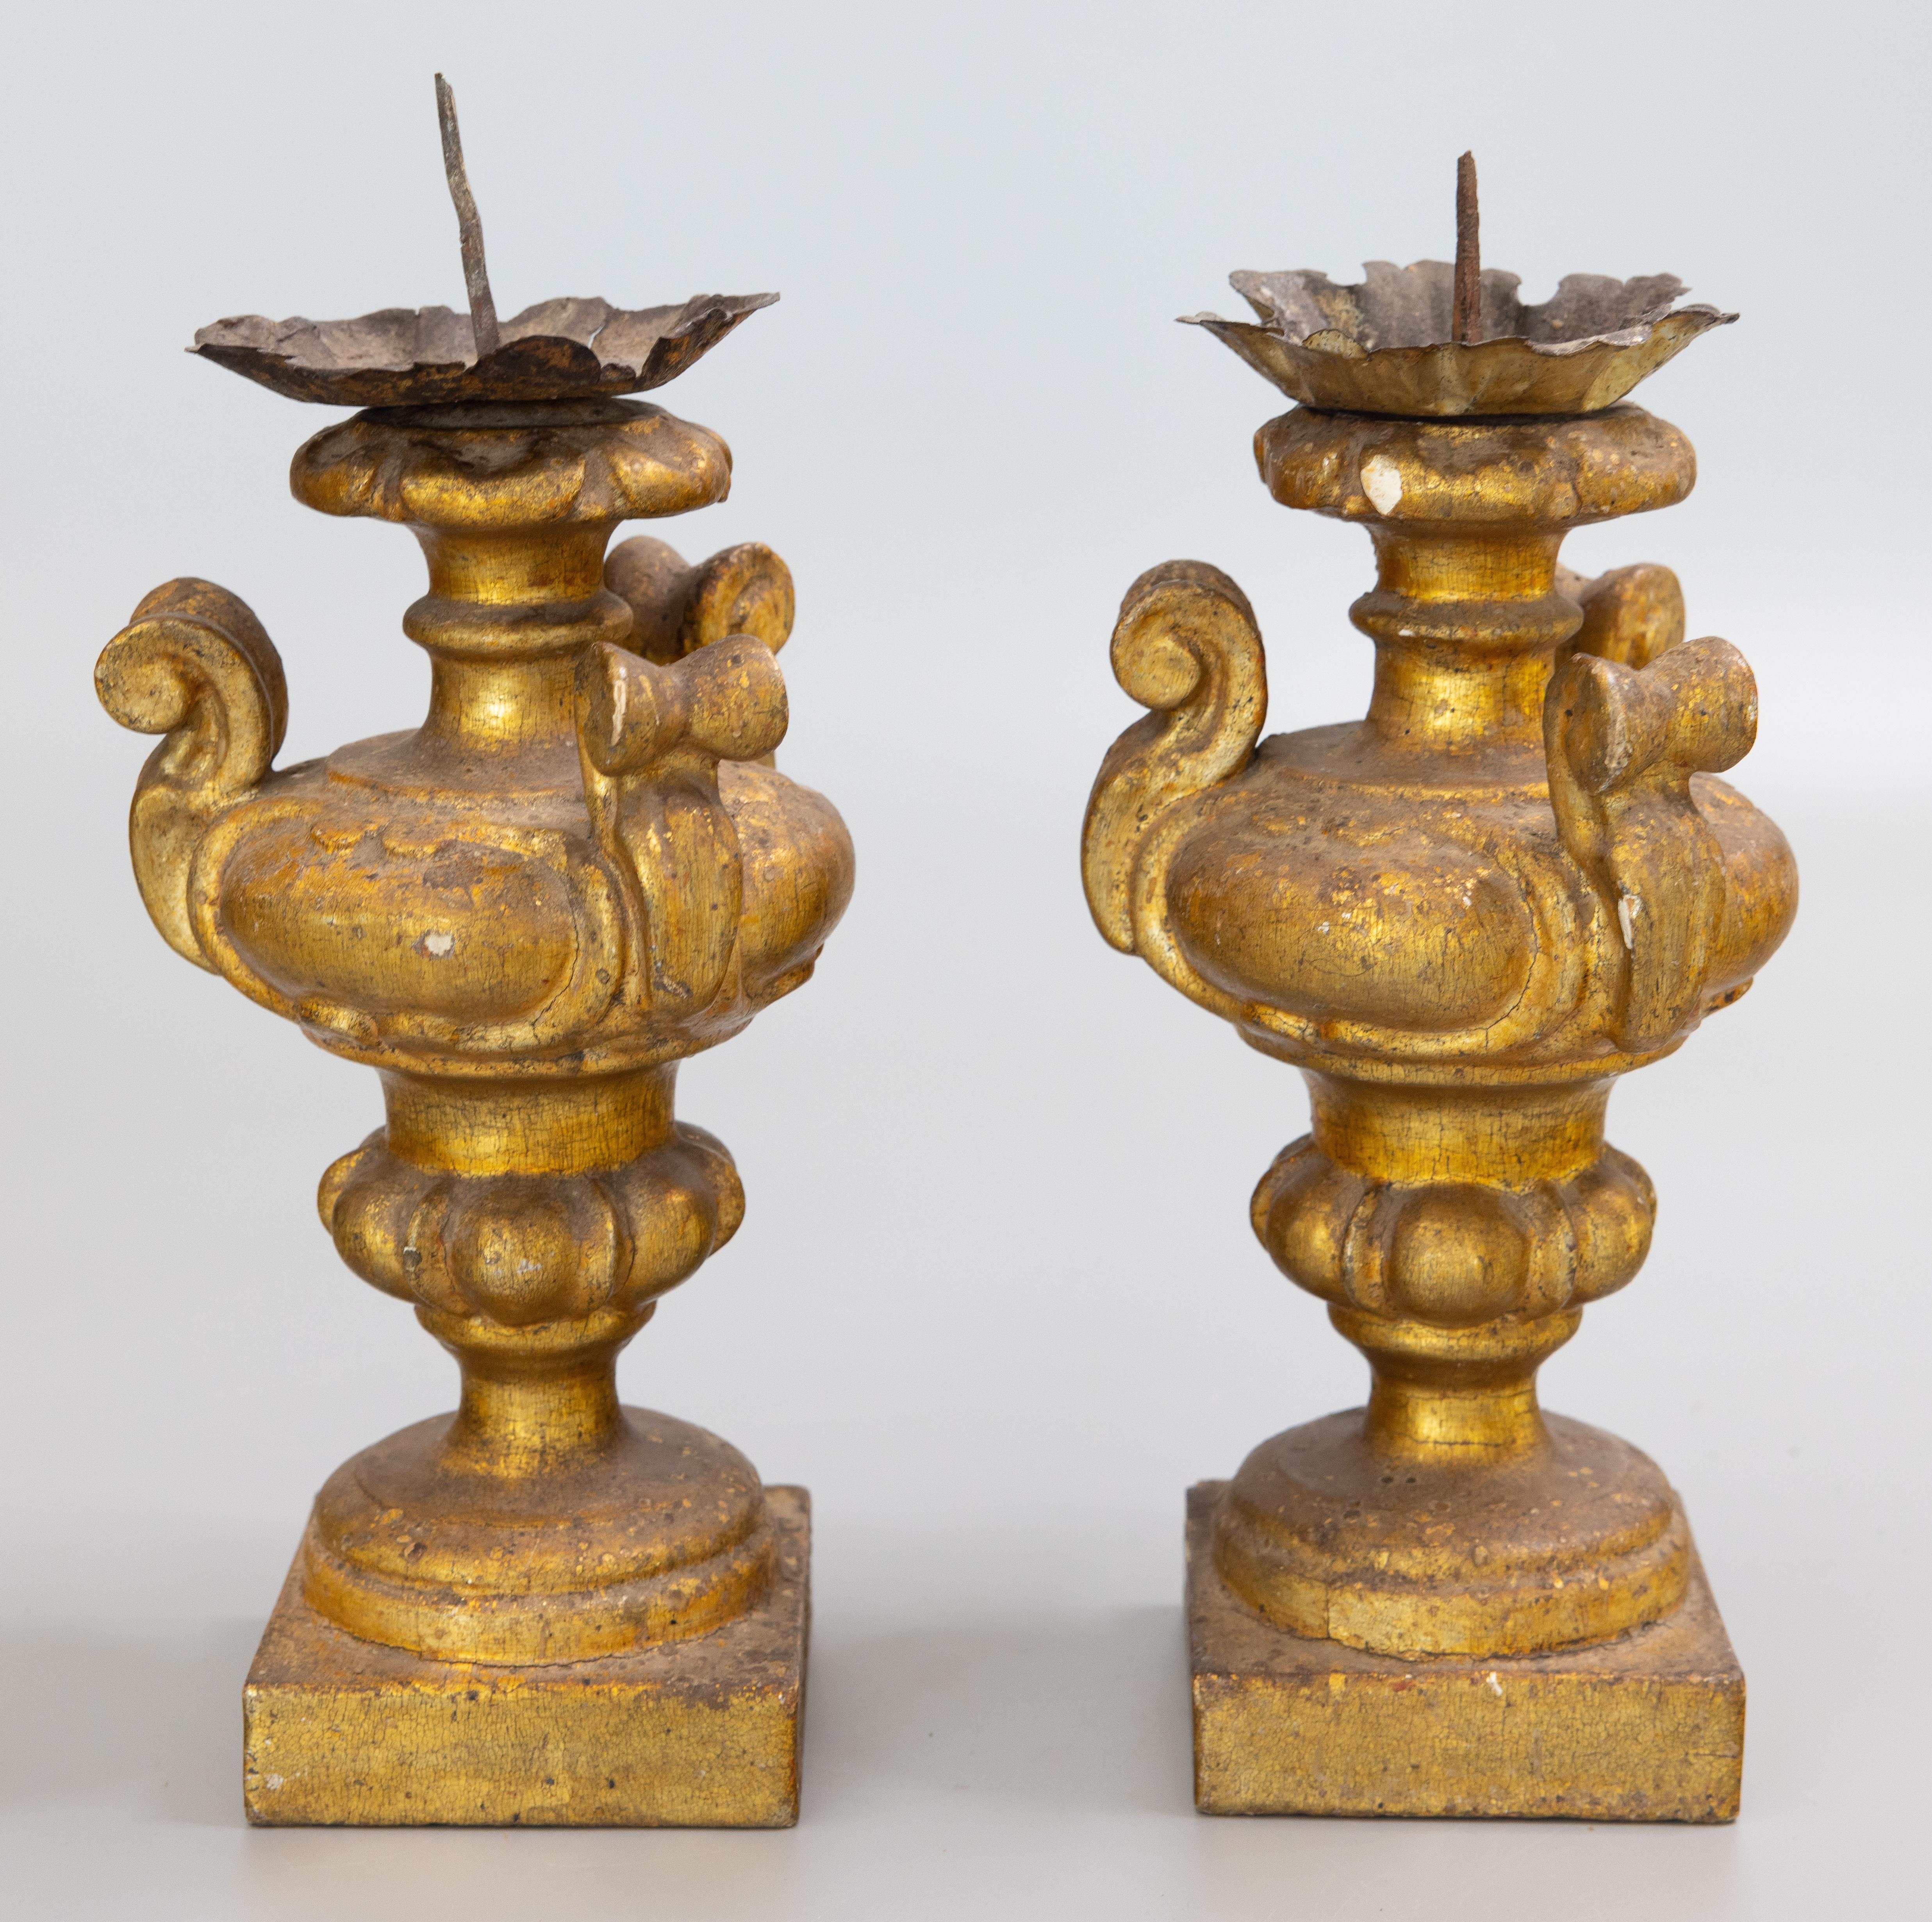 Pair of 18th Century Neoclassical Italian Giltwood Urns Pricket Candlesticks In Good Condition For Sale In Pearland, TX